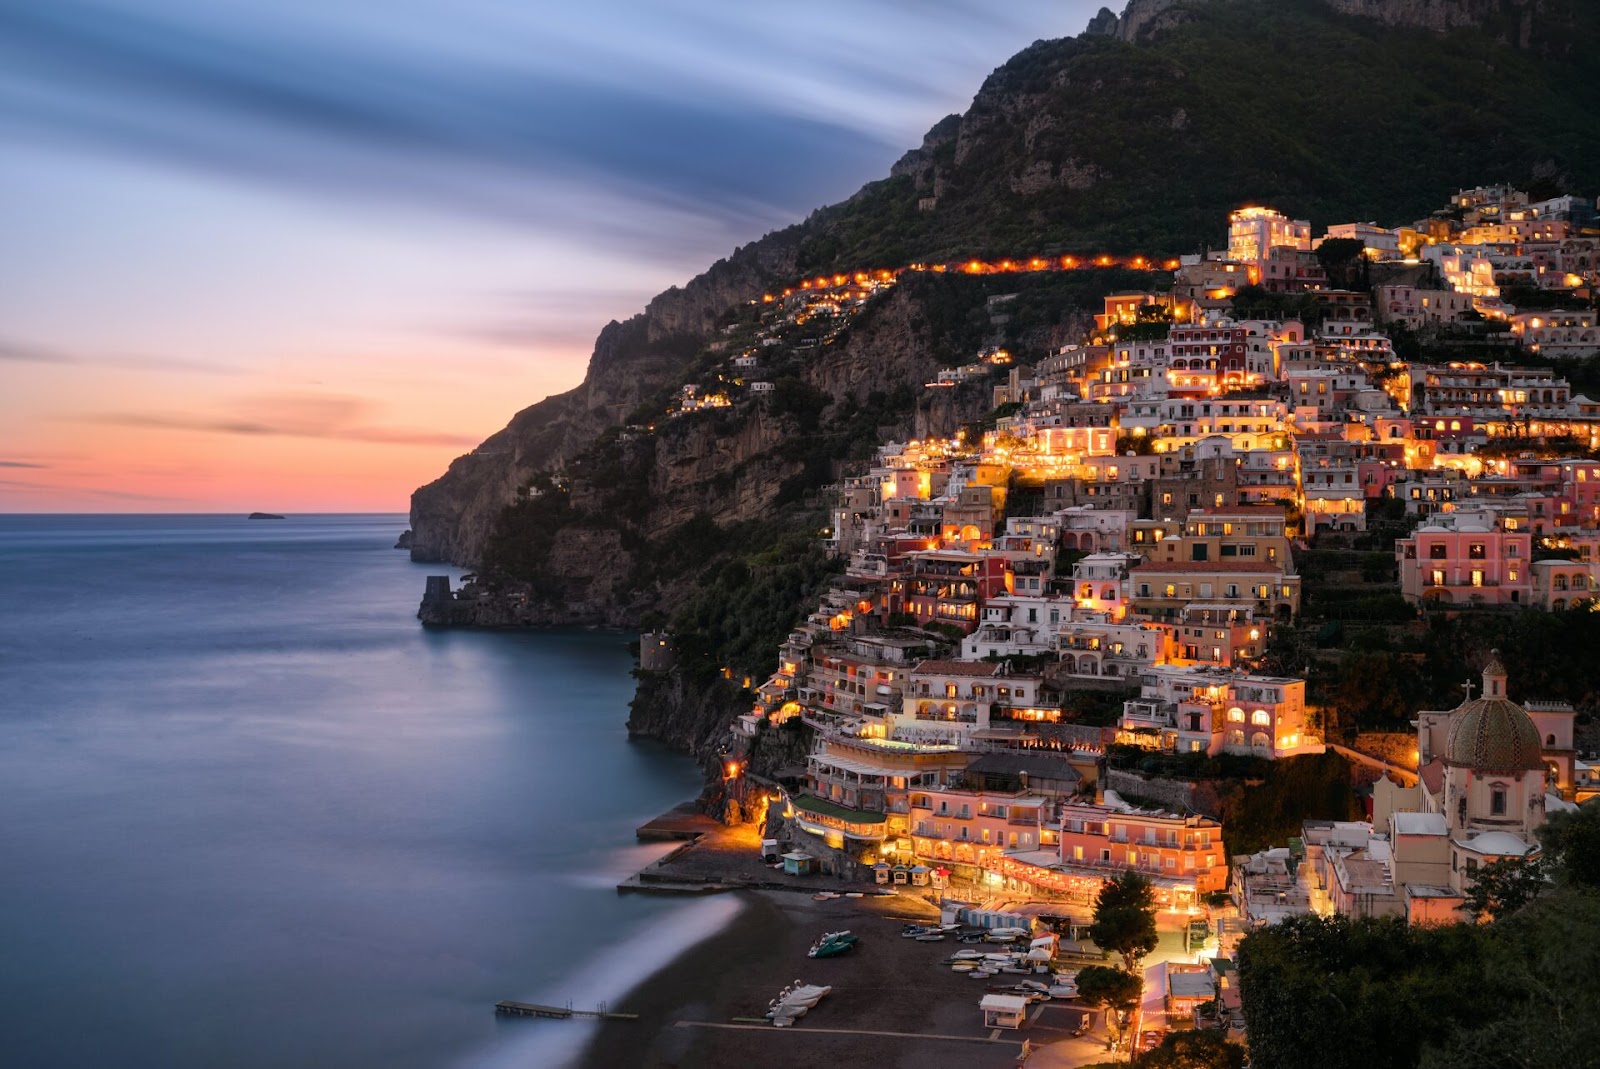 The town along Amalfi Coastline, Italy is shown in the picture